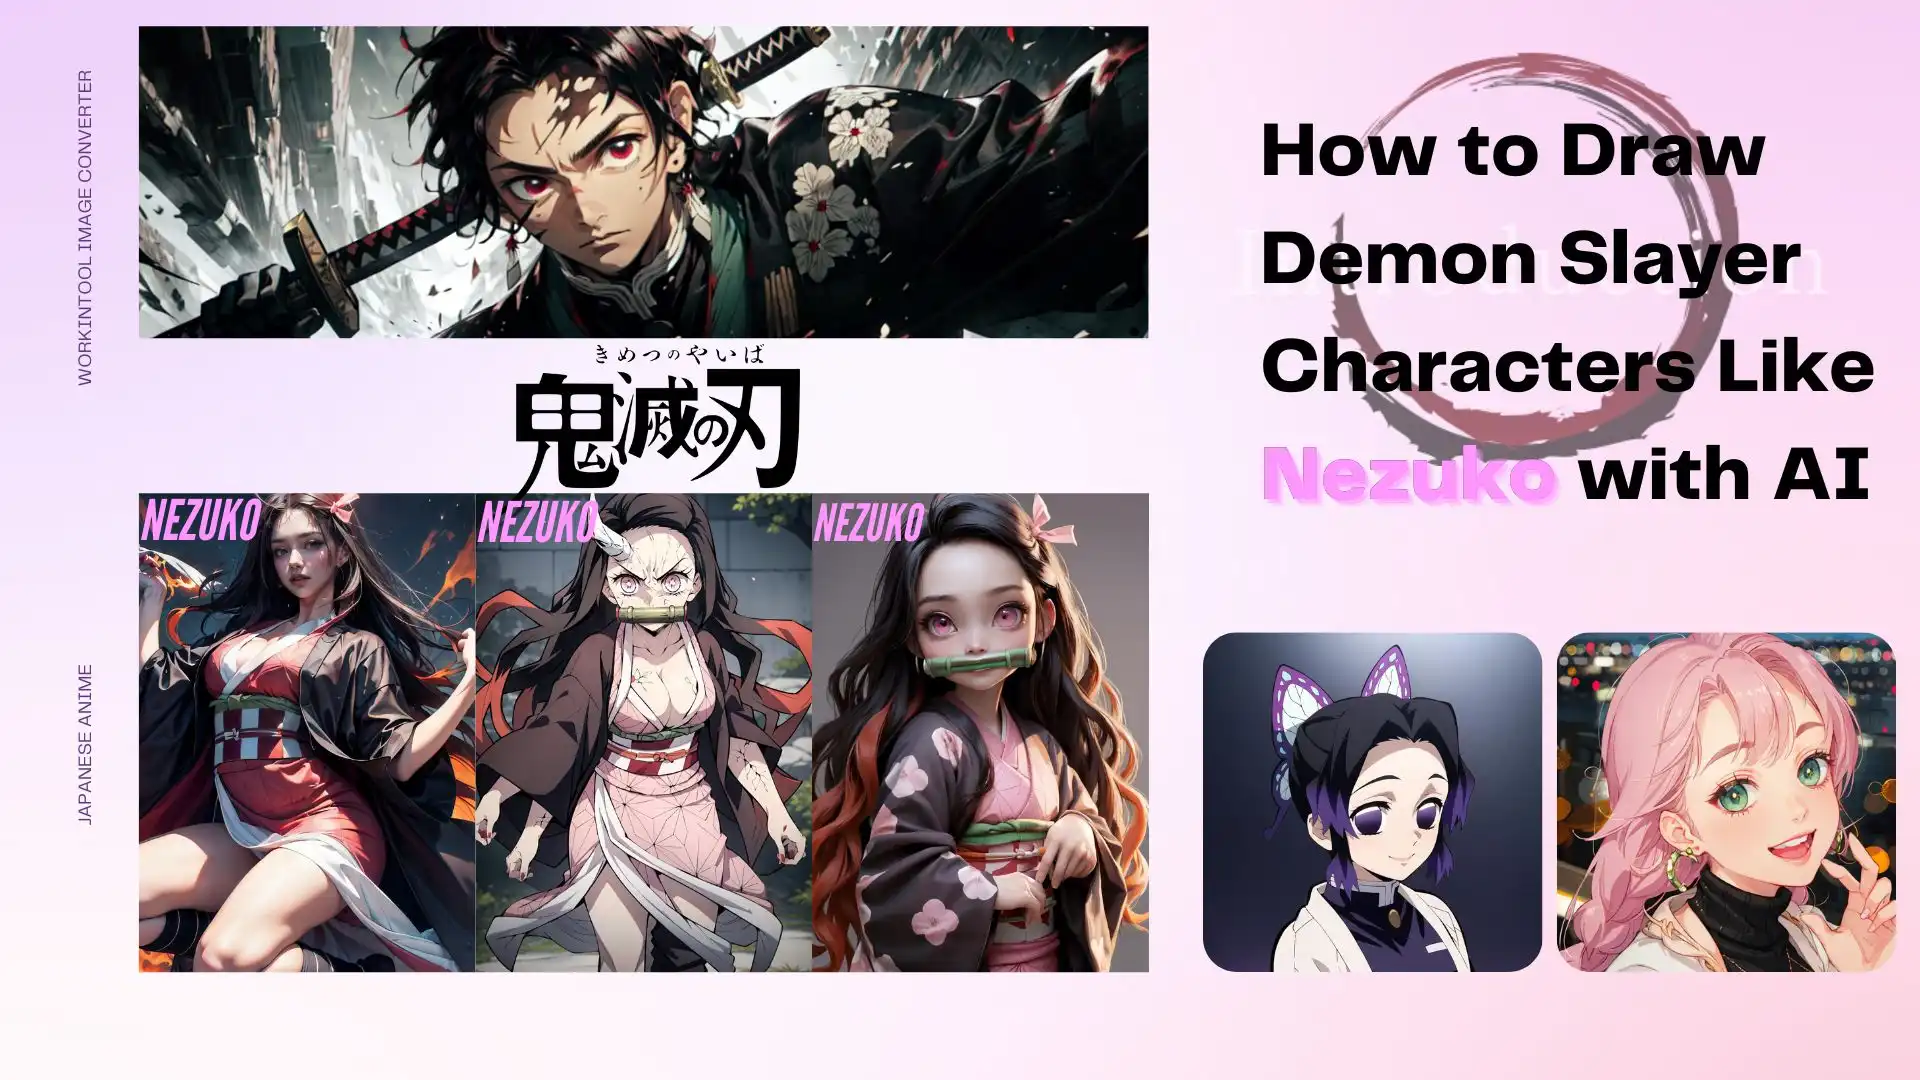 how to draw demon slayer characters post